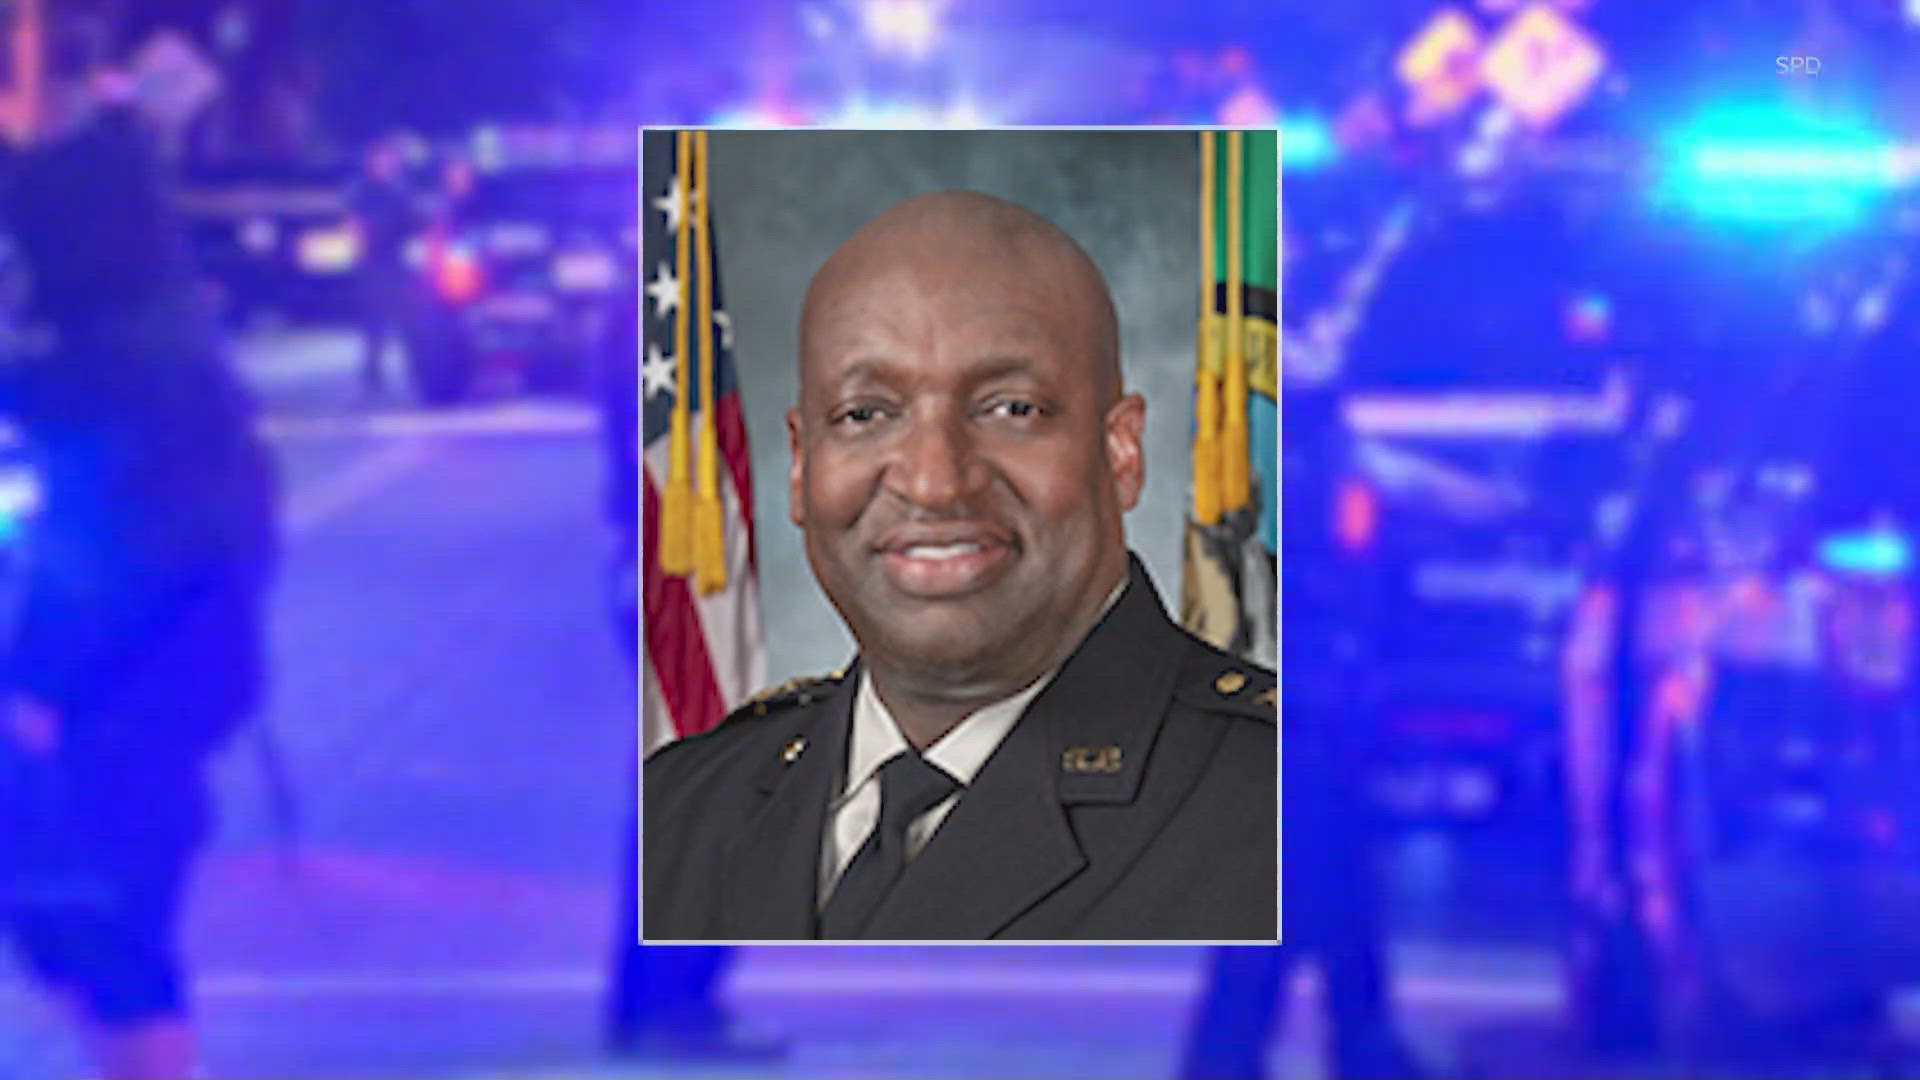 One week after Davis was placed on leave, he has returned to duty, SPD confirms.